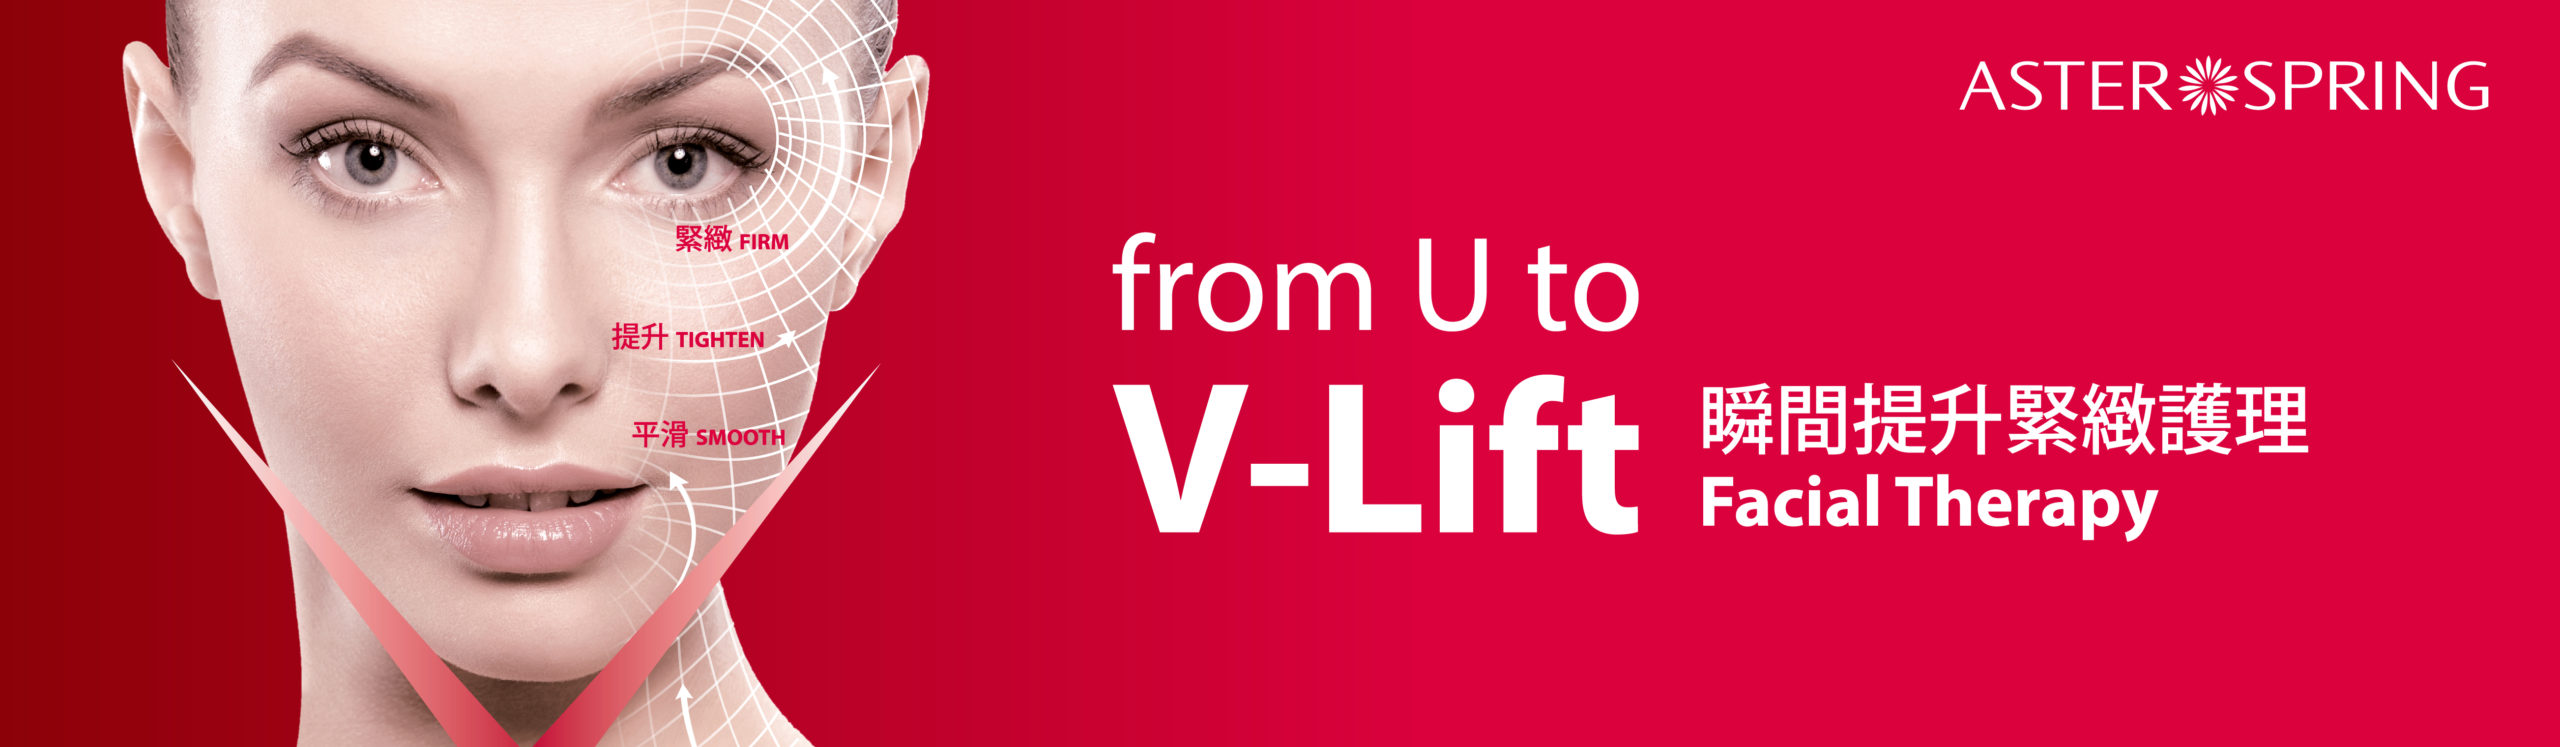 From U to V V-Lift Facial Therapy 瞬間提升緊緻護理